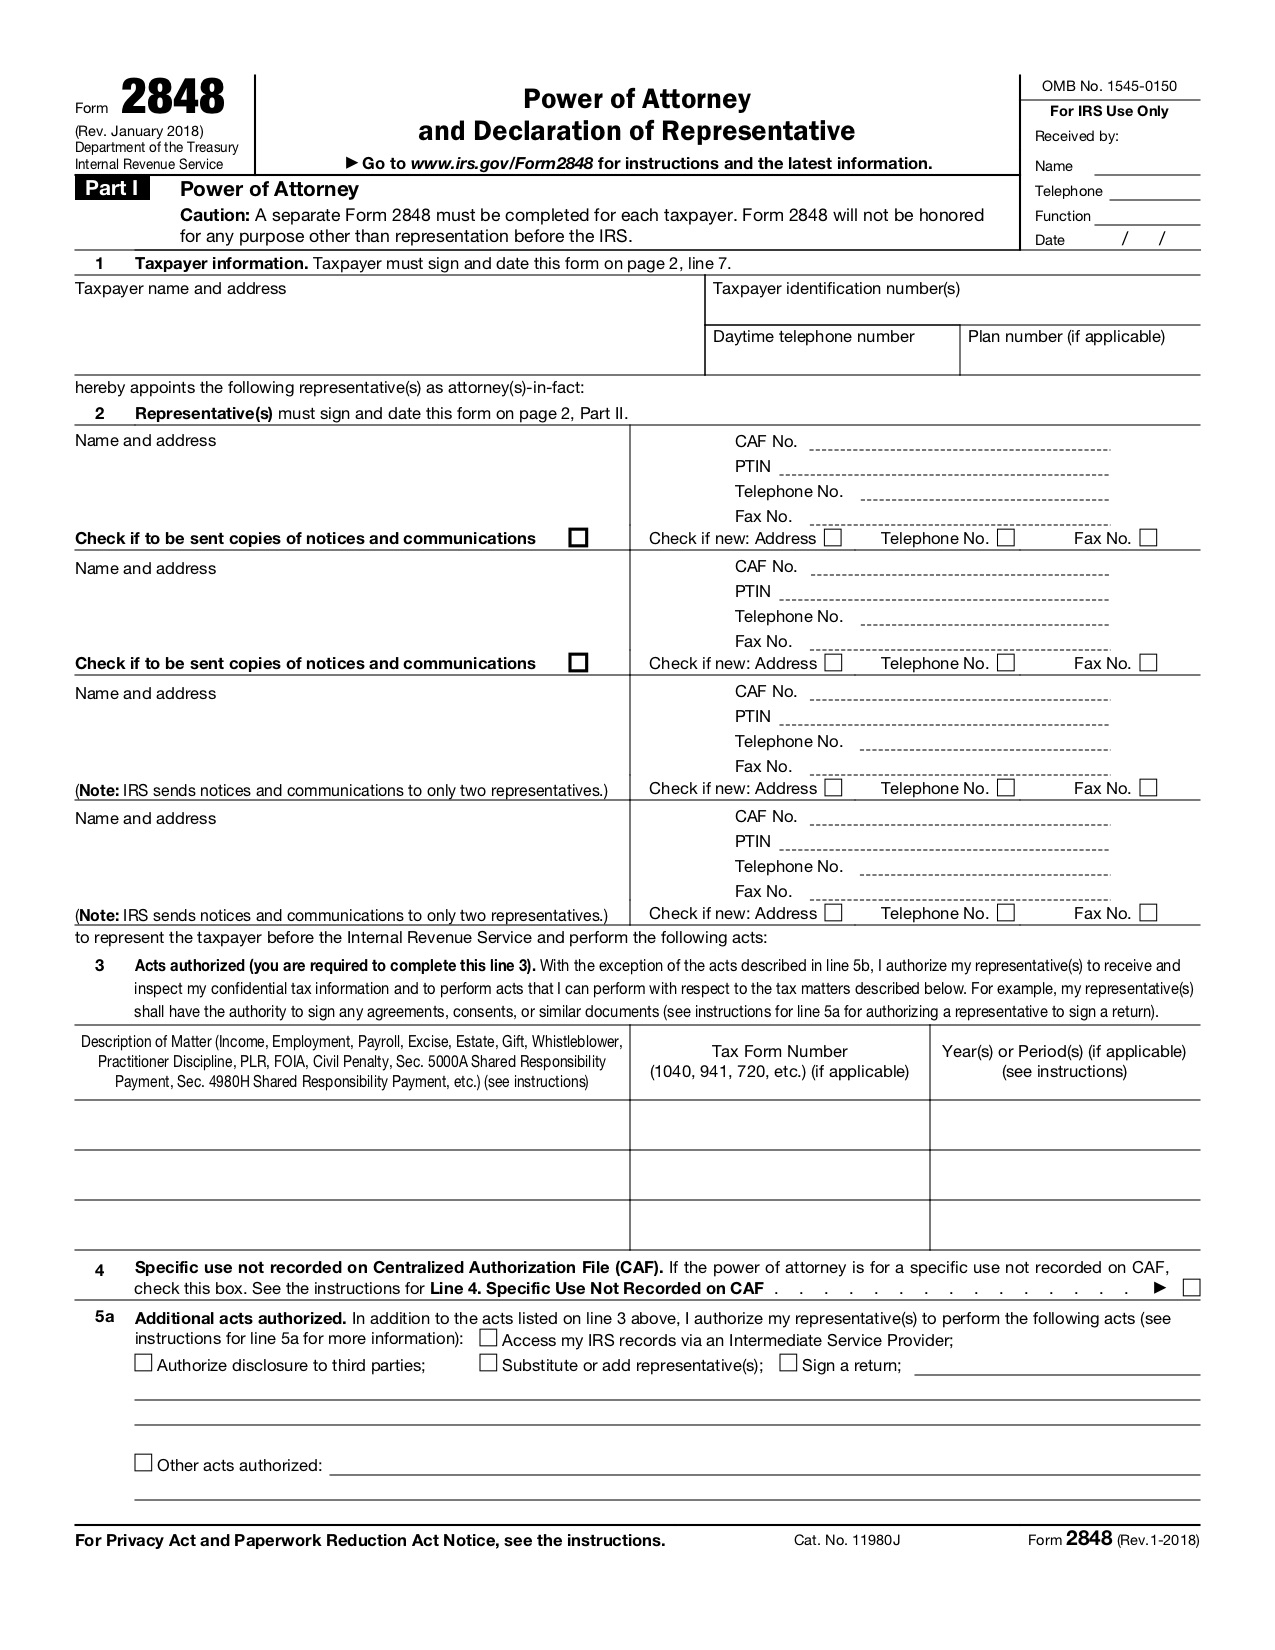 IRS Form 2848 Power Of Attorney What Is It And When Do 